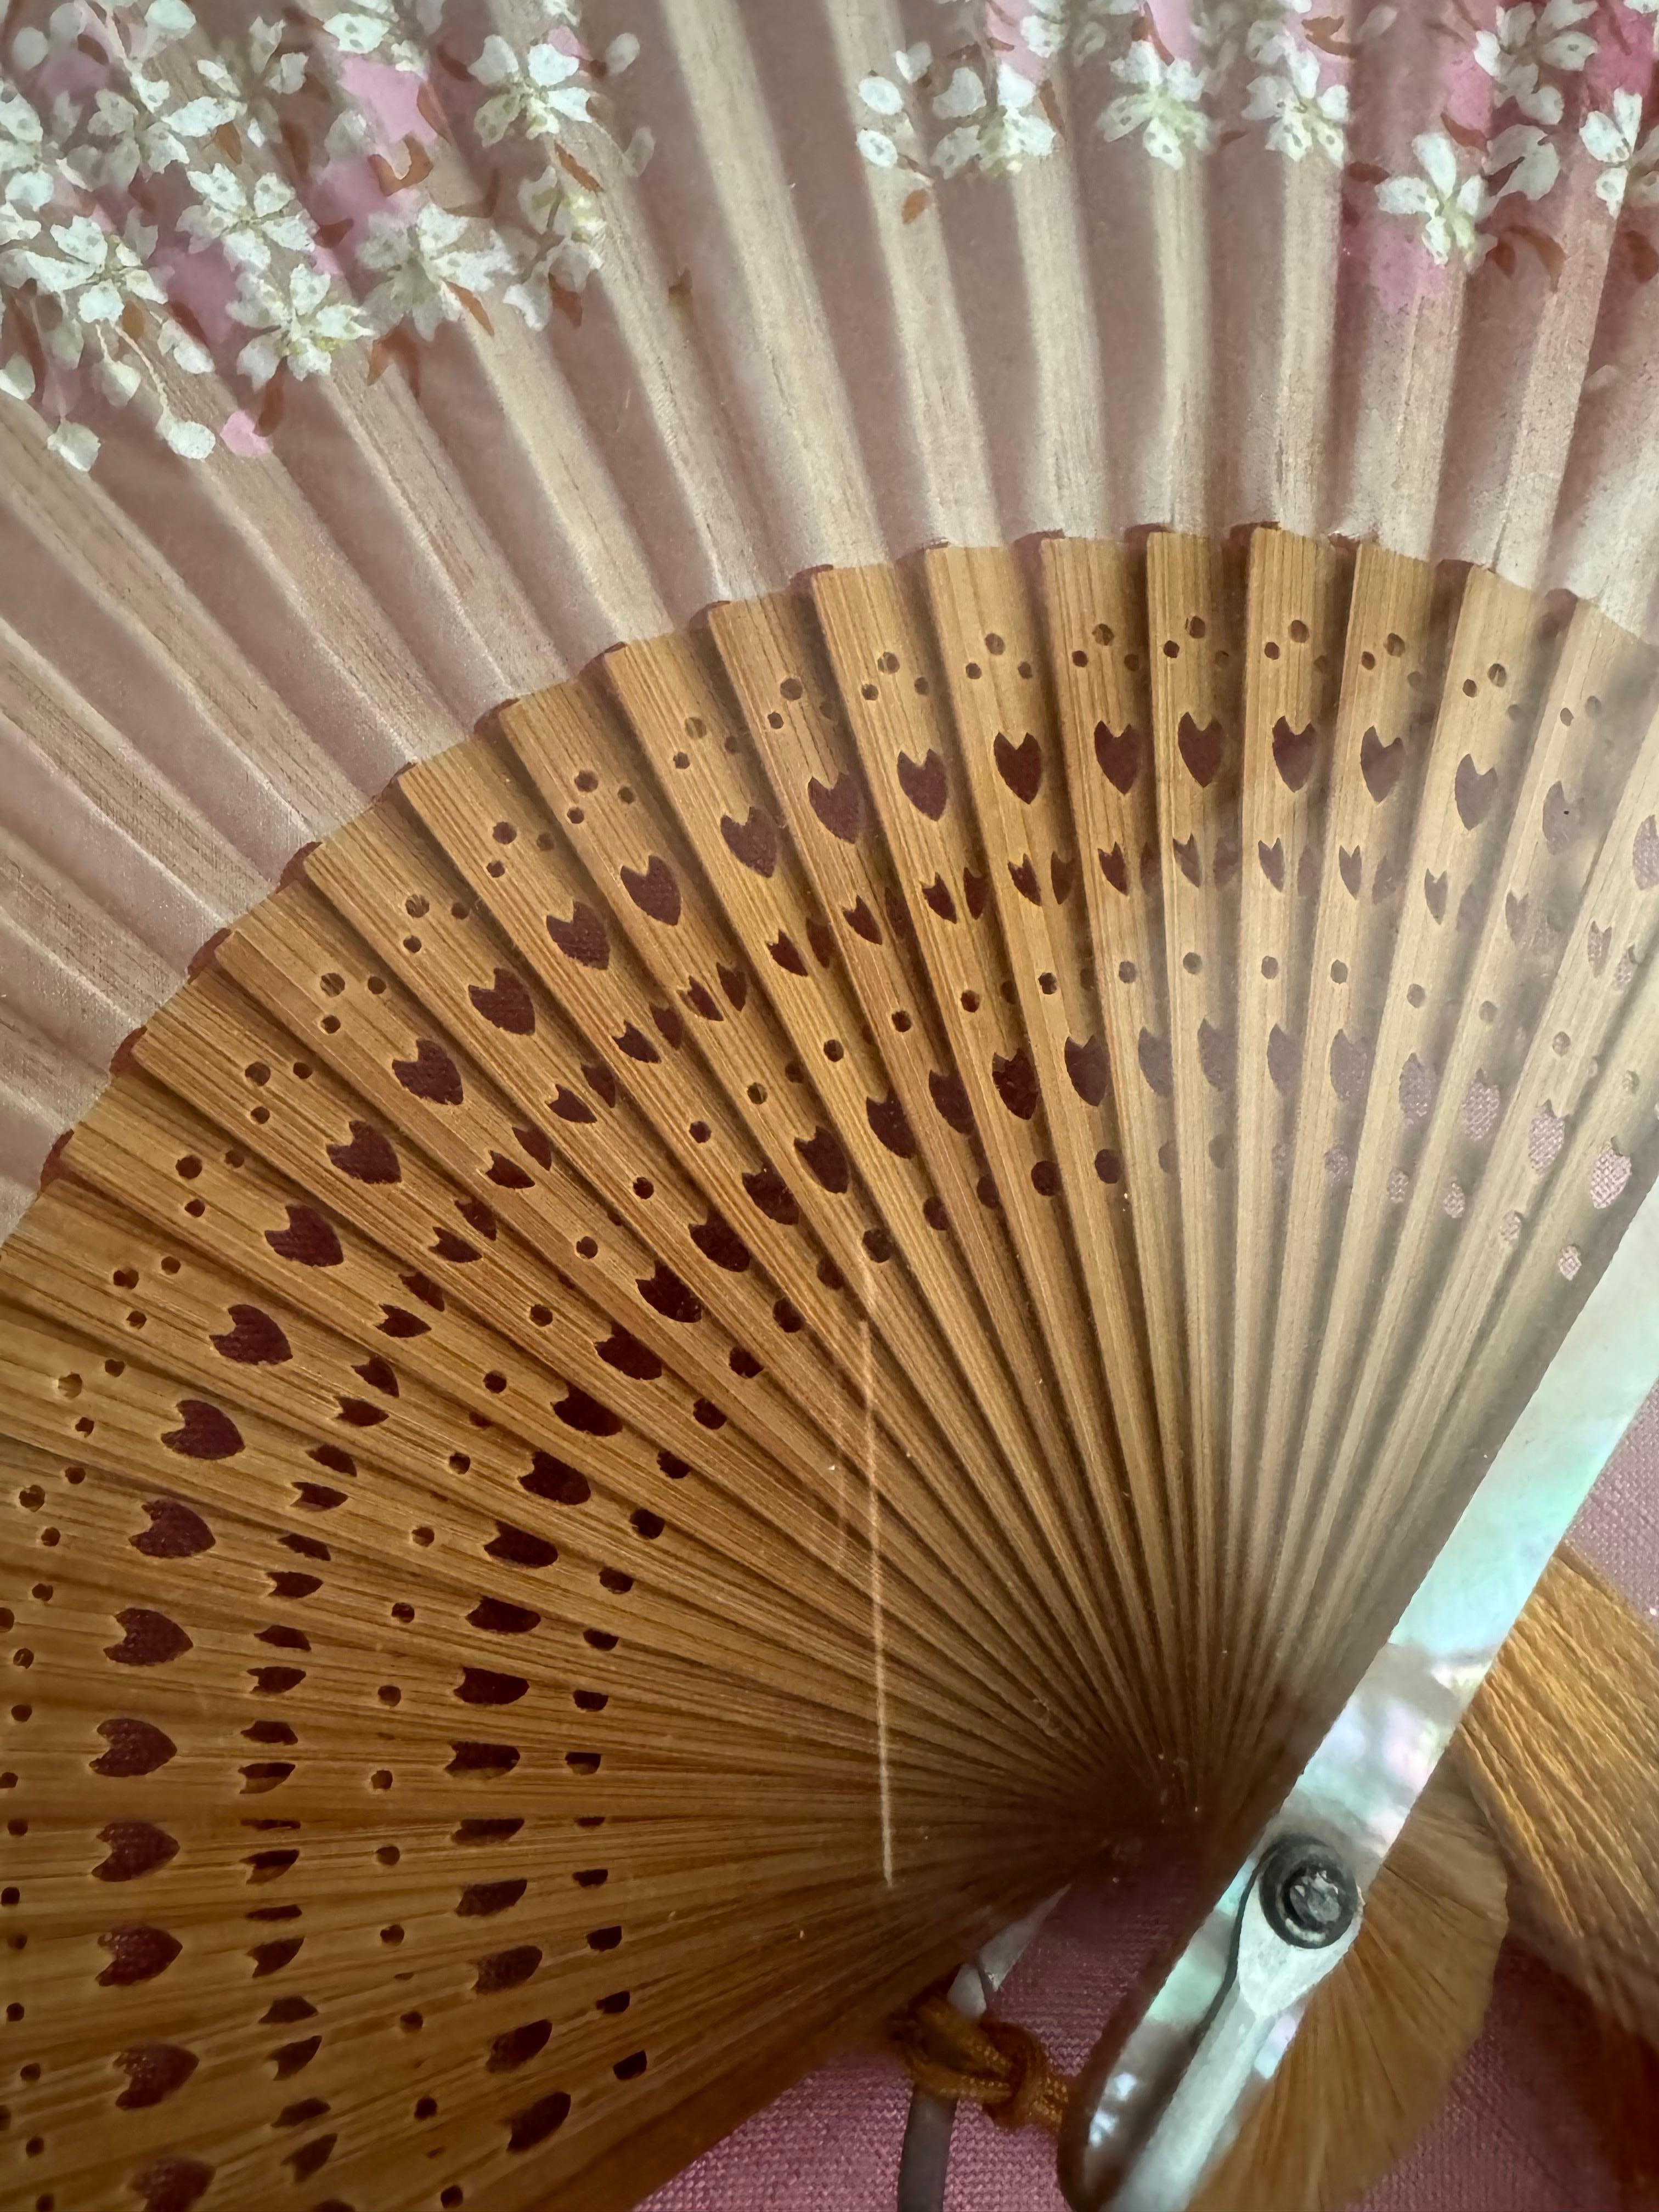 Vintage Japanese Hand Painted Cherry Blossom Fan In Gold Shadow Box Frame     In Good Condition For Sale In Fort Washington, MD